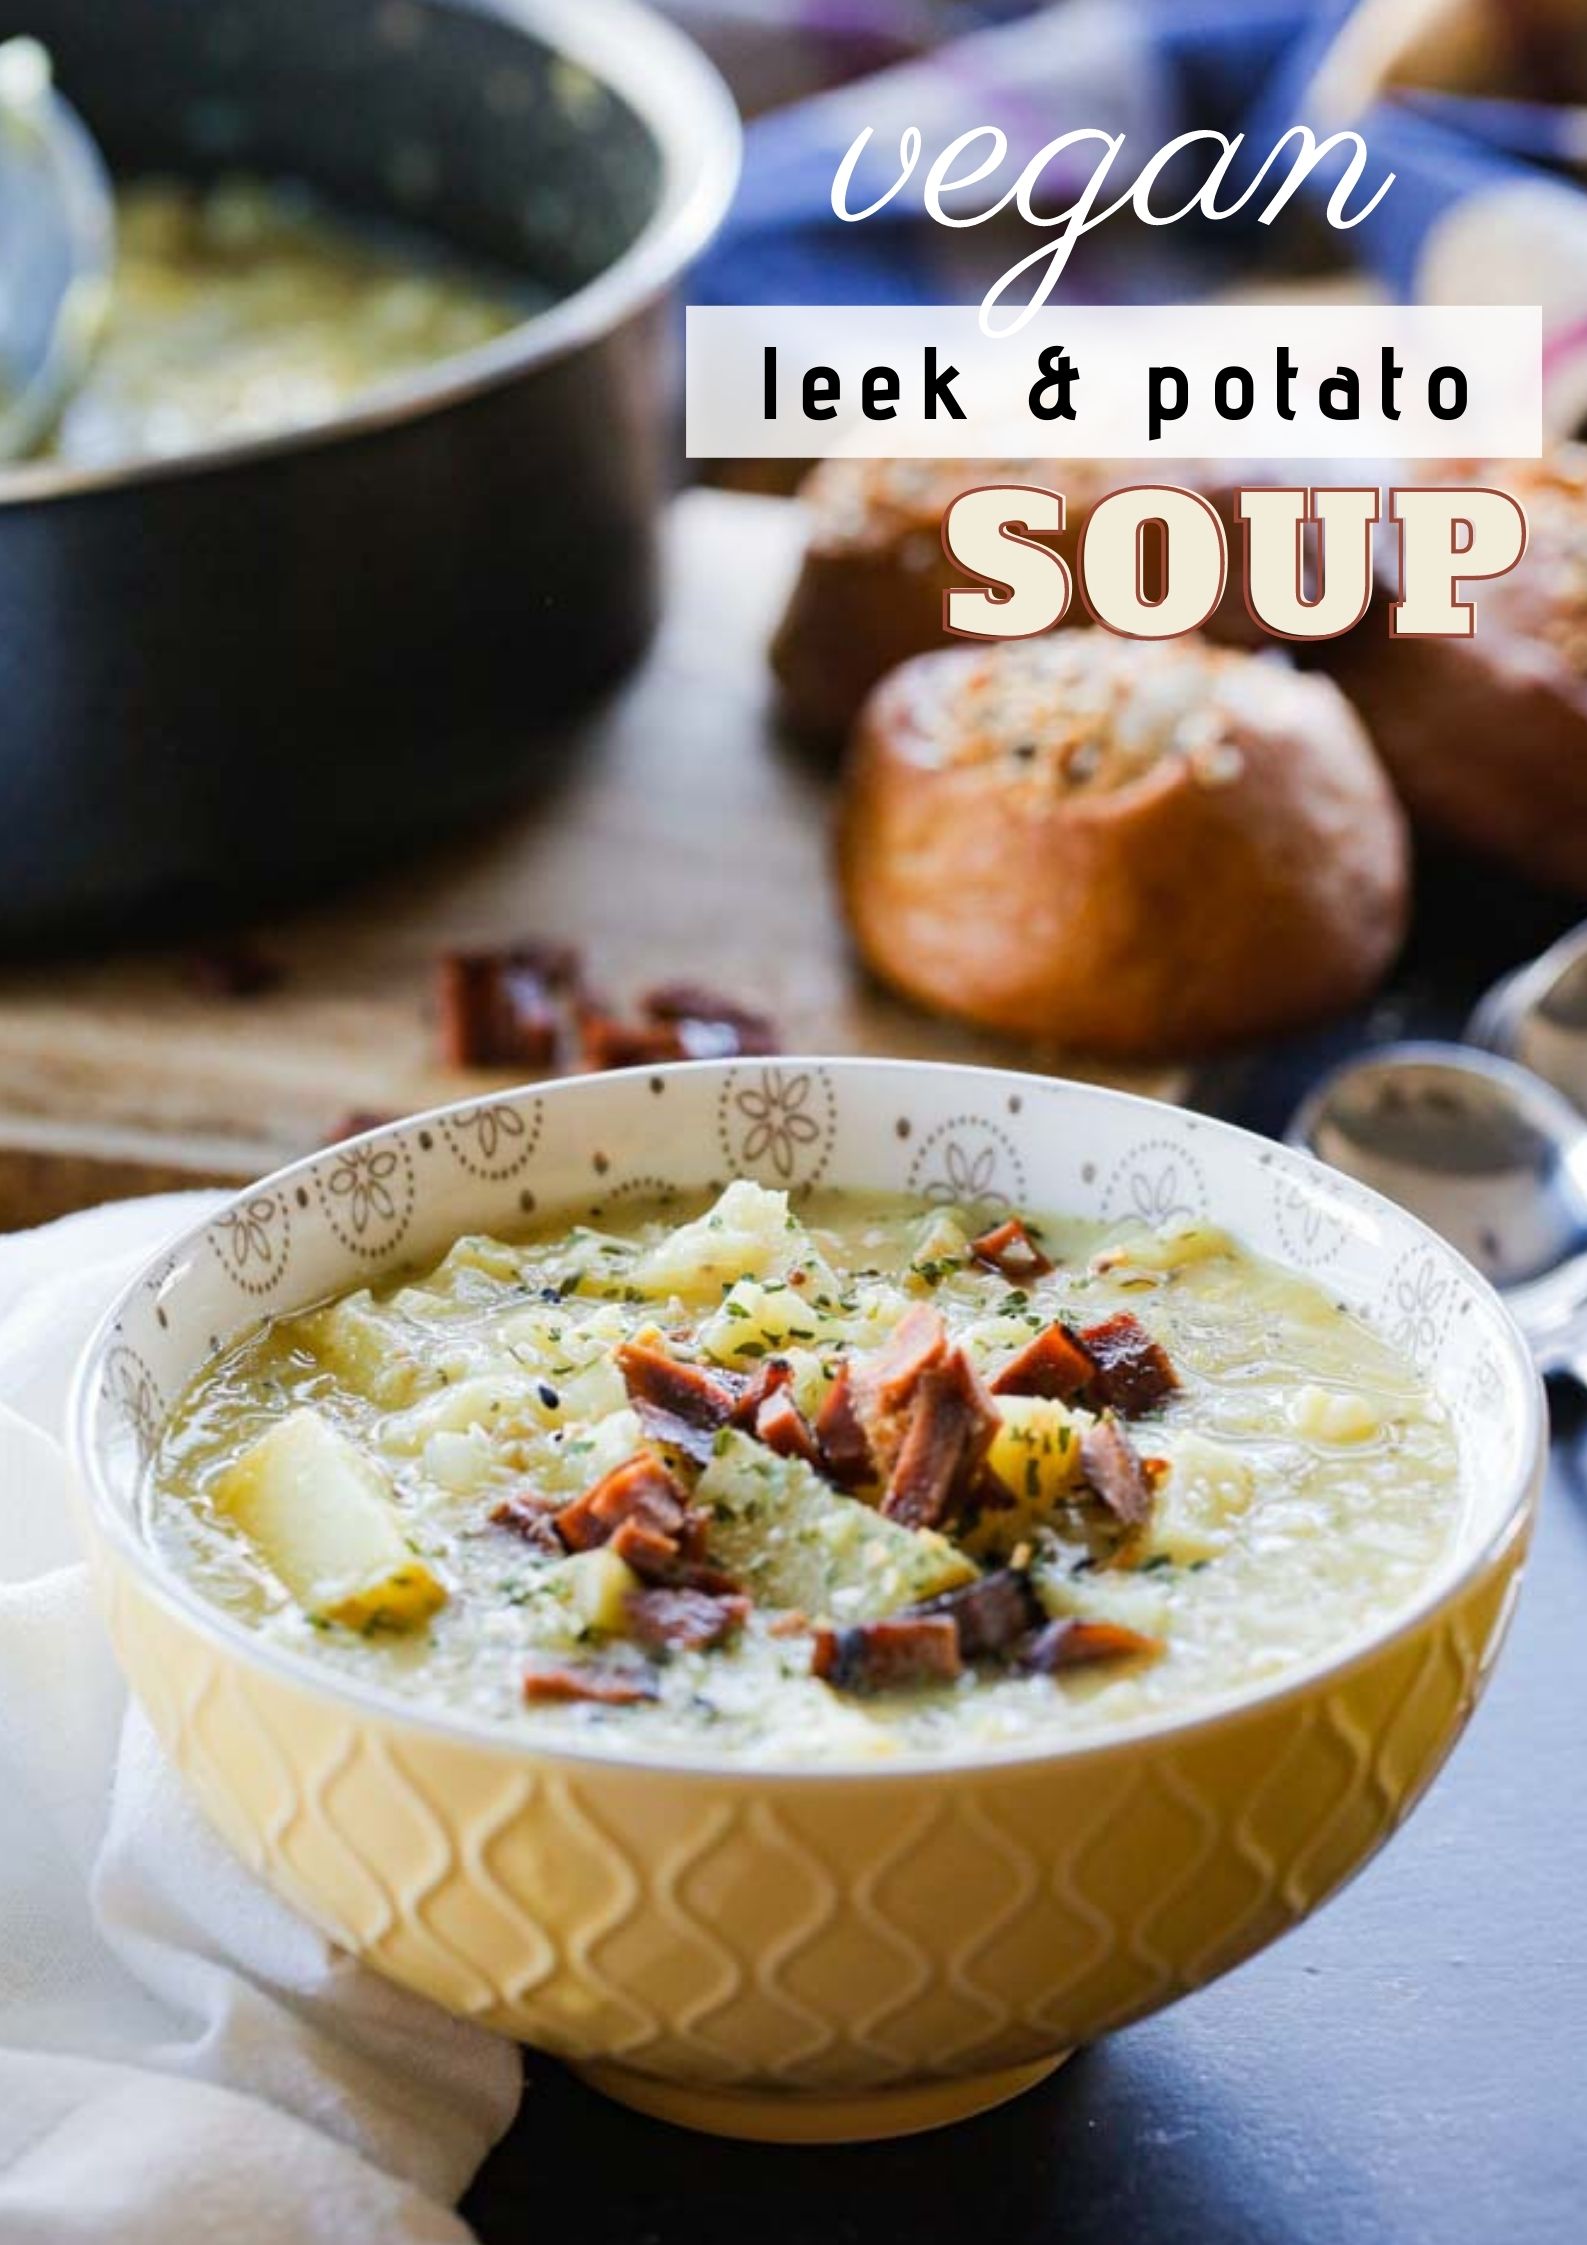 Baby potatoes, fragrant leeks, herbs, garlic, apple cider and vegan cheese are all in this easy, rich and hearty soup. Add crumbled vegan bacon bits for a crispy, salty topping, turning this leek and potato soup into pure comfort food heaven! Recipe on thecookandhim.com | #leekandpotatosoup #homemadesoup #healthysoup #vegansoup #soup #souprecipe #leekrecipes #potatorecipes #wintersoup